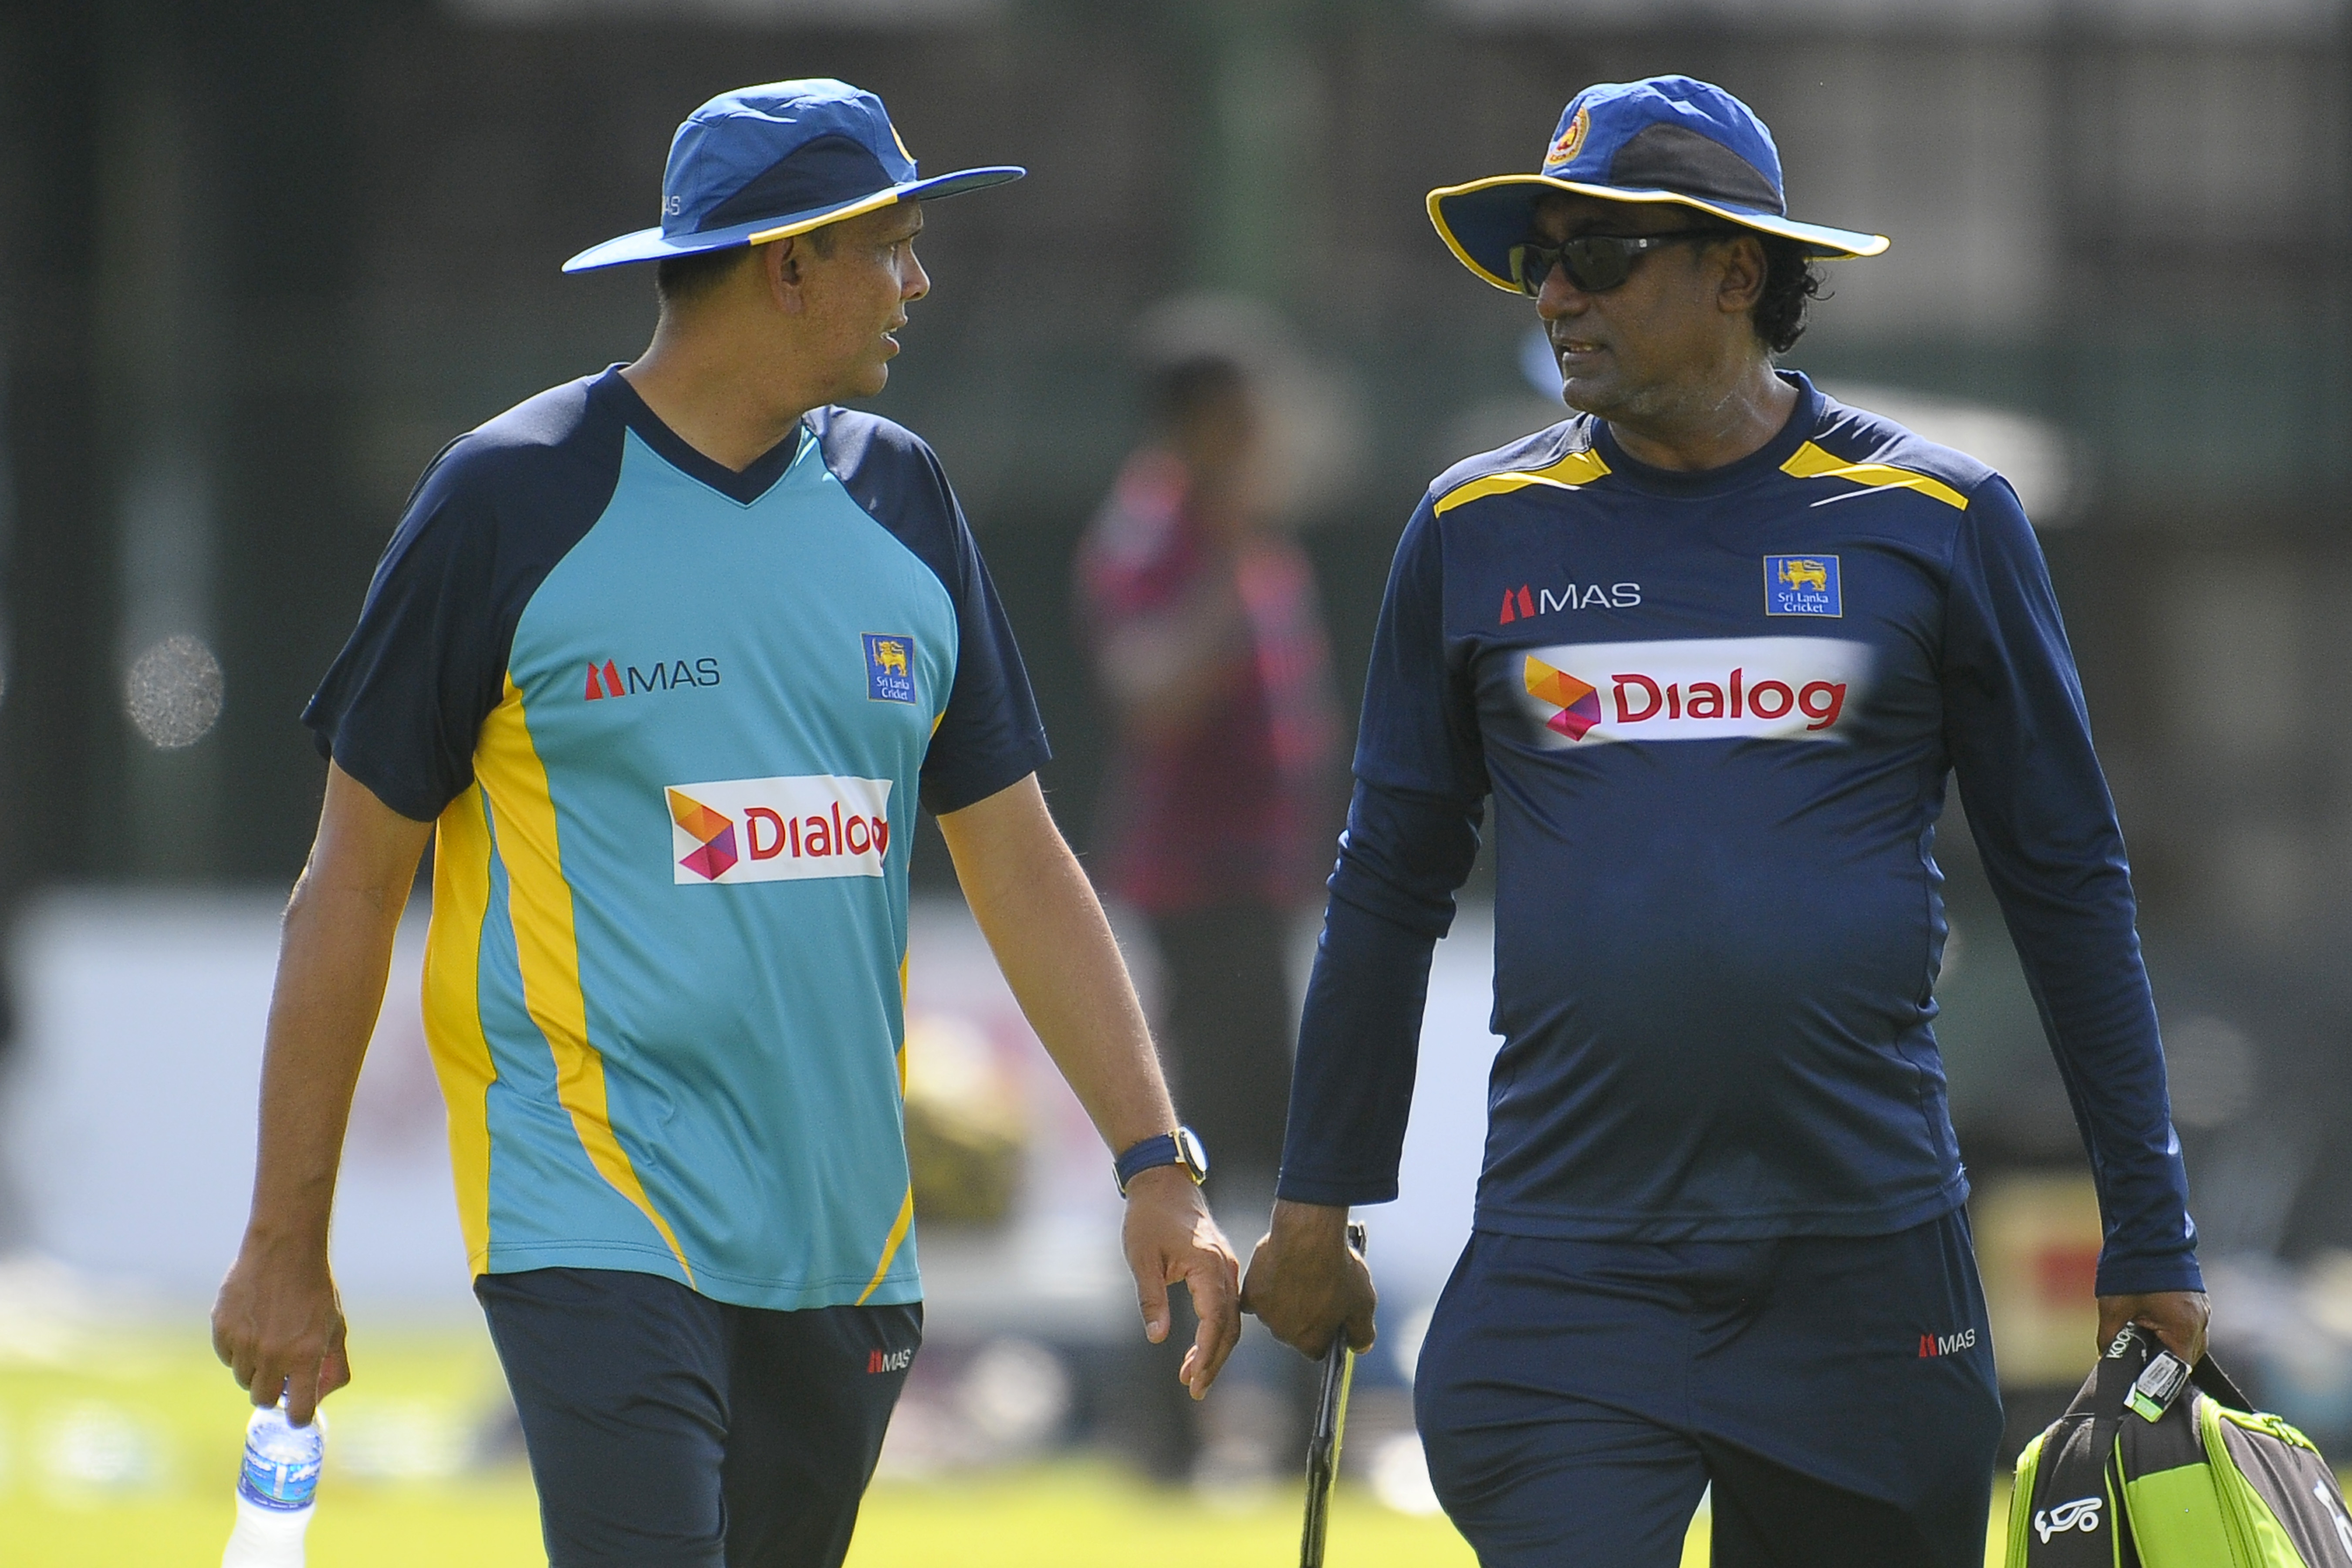 Rumesh Ratnayake appointed interim coach of the National Team for the upcoming Sri Lanka Tour of Australia